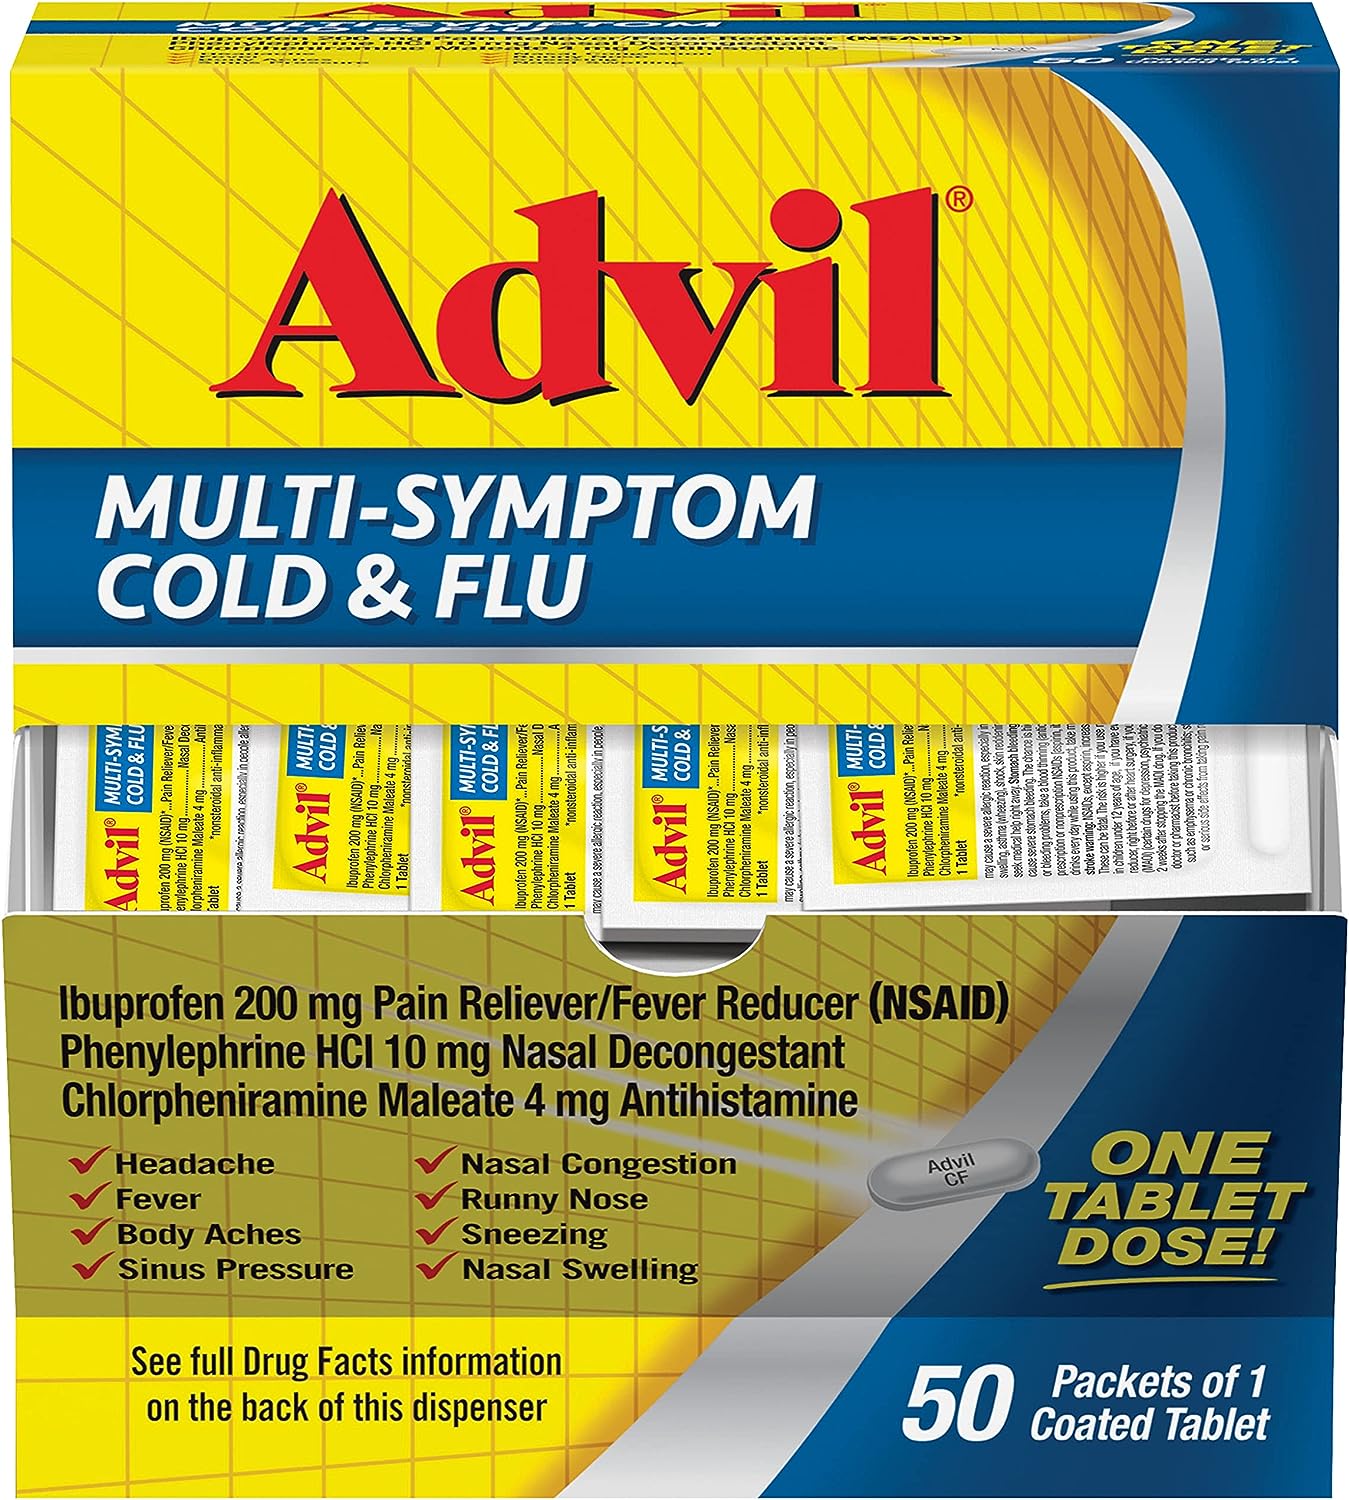 Advil Multi Symptom Cold and Flu Medicine, Cold Medicine for Adults with Ibuprofen, Phenylephrine HCL and Chlorpheniramine Maleate - 50 Coated Tablets